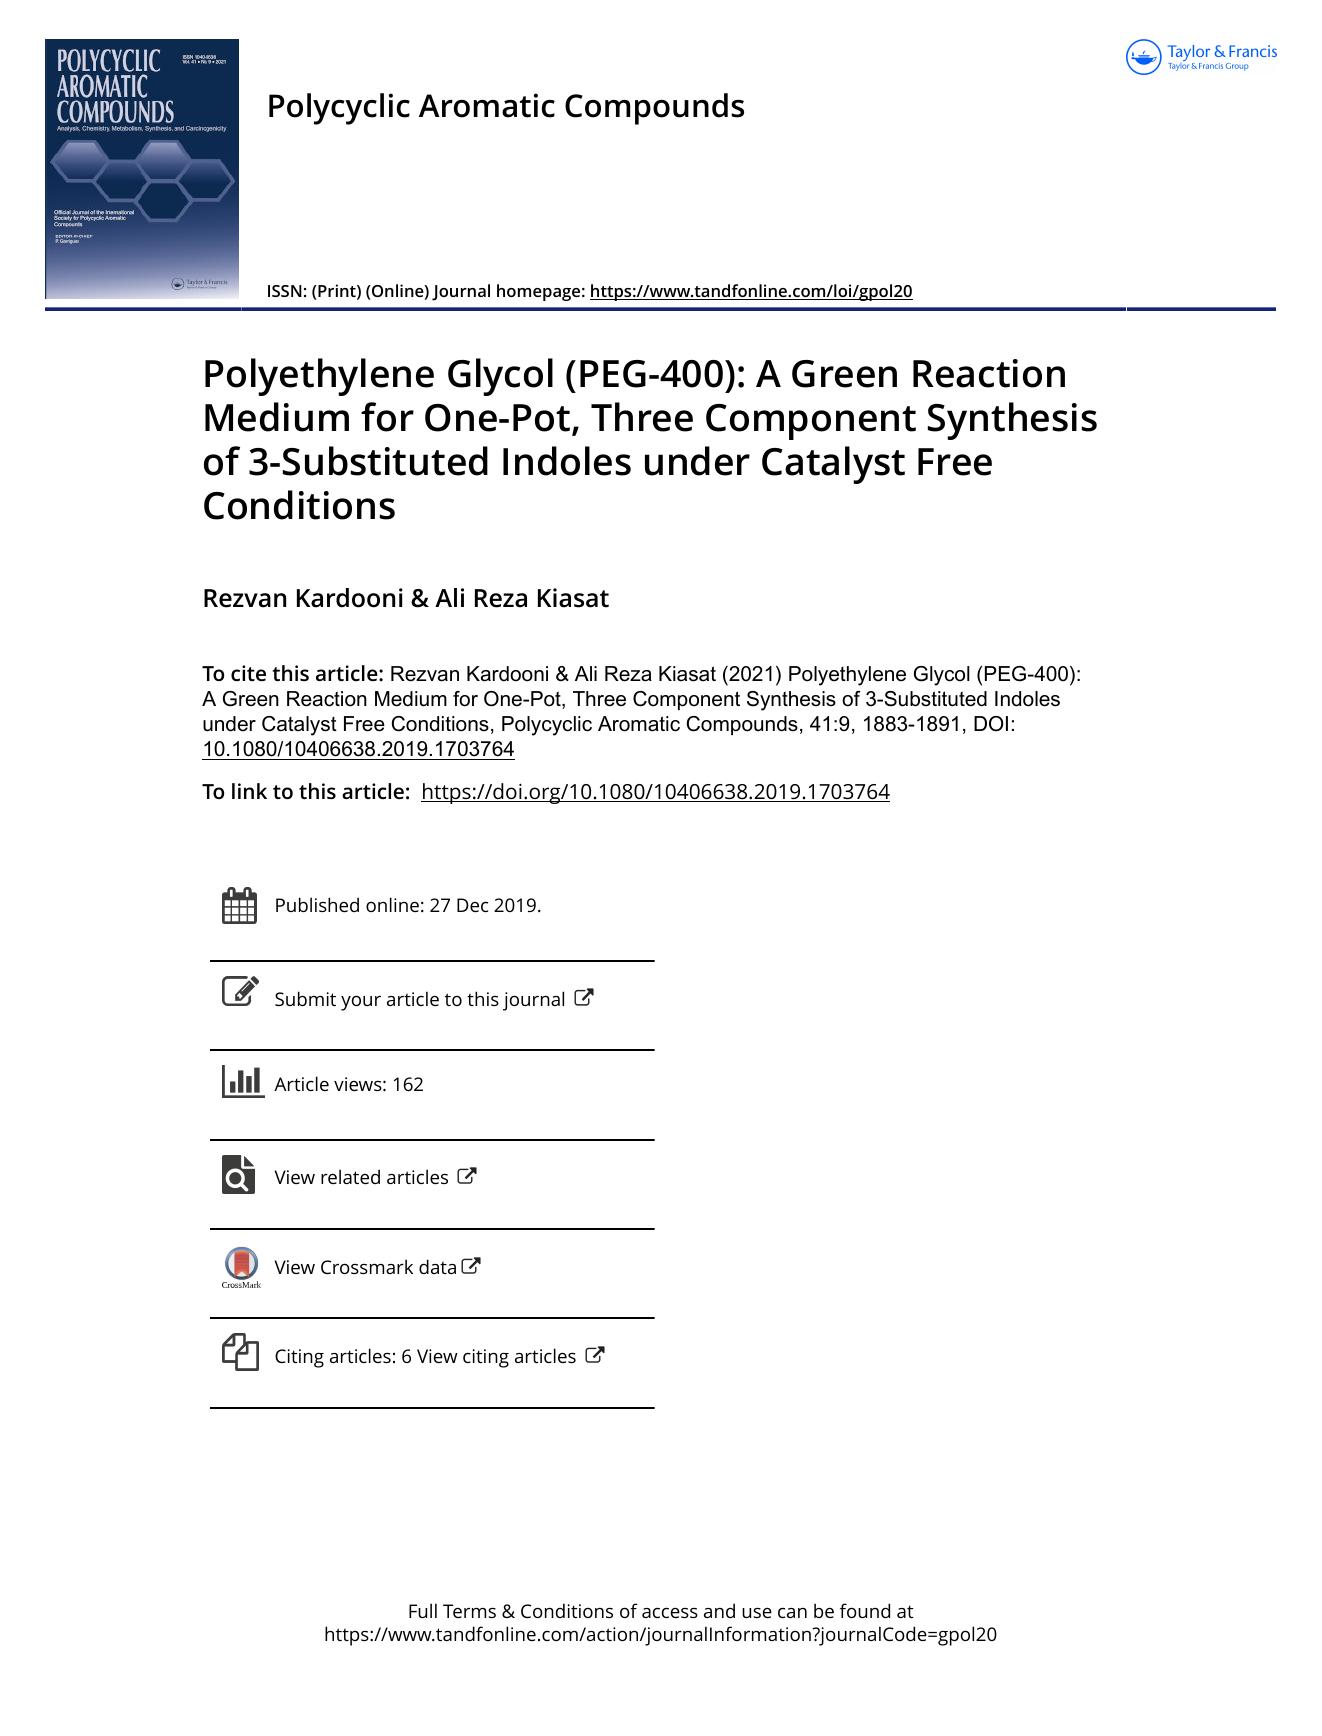 Polyethylene Glycol (PEG-400): A Green Reaction Medium for One-Pot, Three Component Synthesis of 3-Substituted Indoles under Catalyst Free Conditions by Kardooni Rezvan & Kiasat Ali Reza